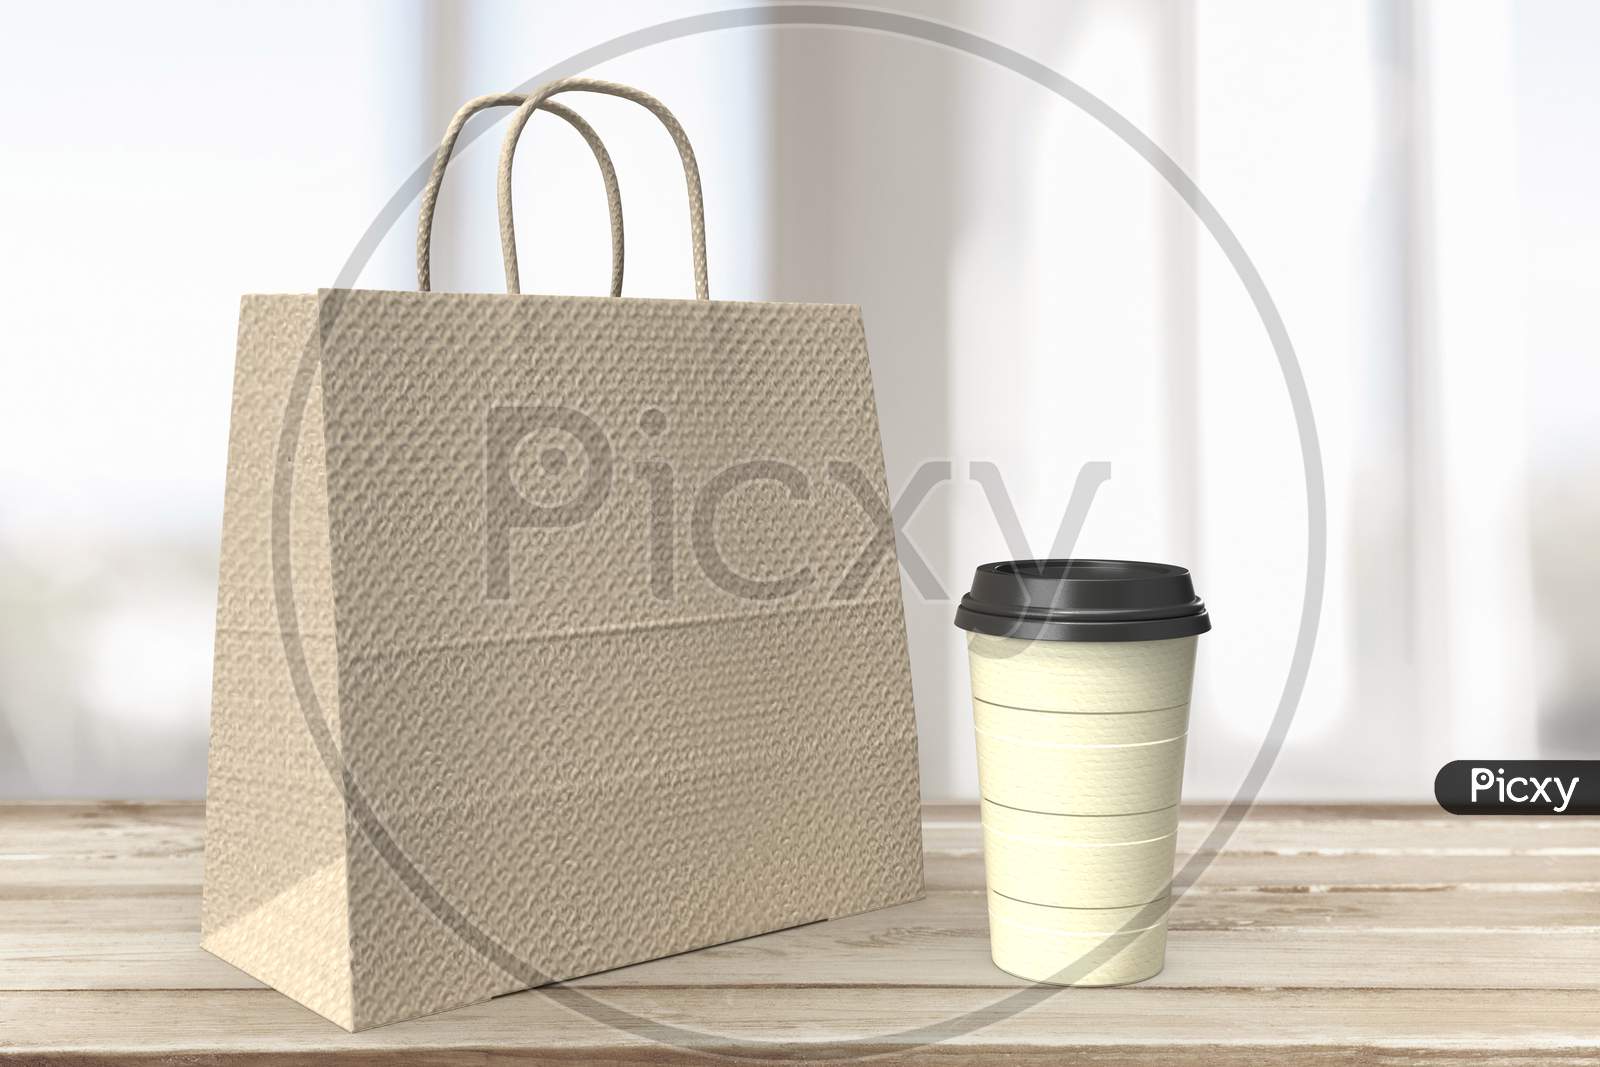 Realistic Looking Shopping Bag And Disposable Coffee Cup With Blank Mockups At Wooden Table Top In Blurred Background, 3D Rendering